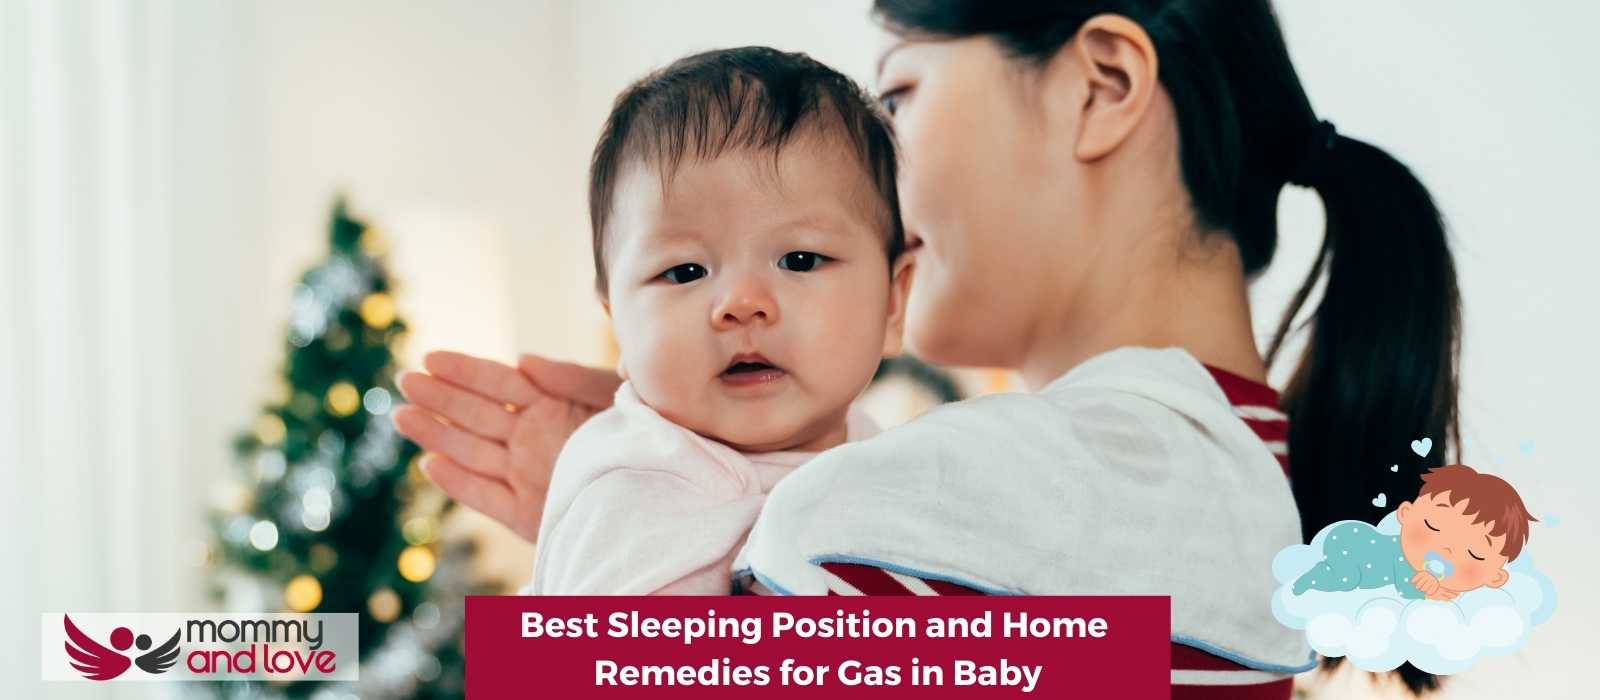 Best Sleeping Position and Home Remedies for Gas in Baby